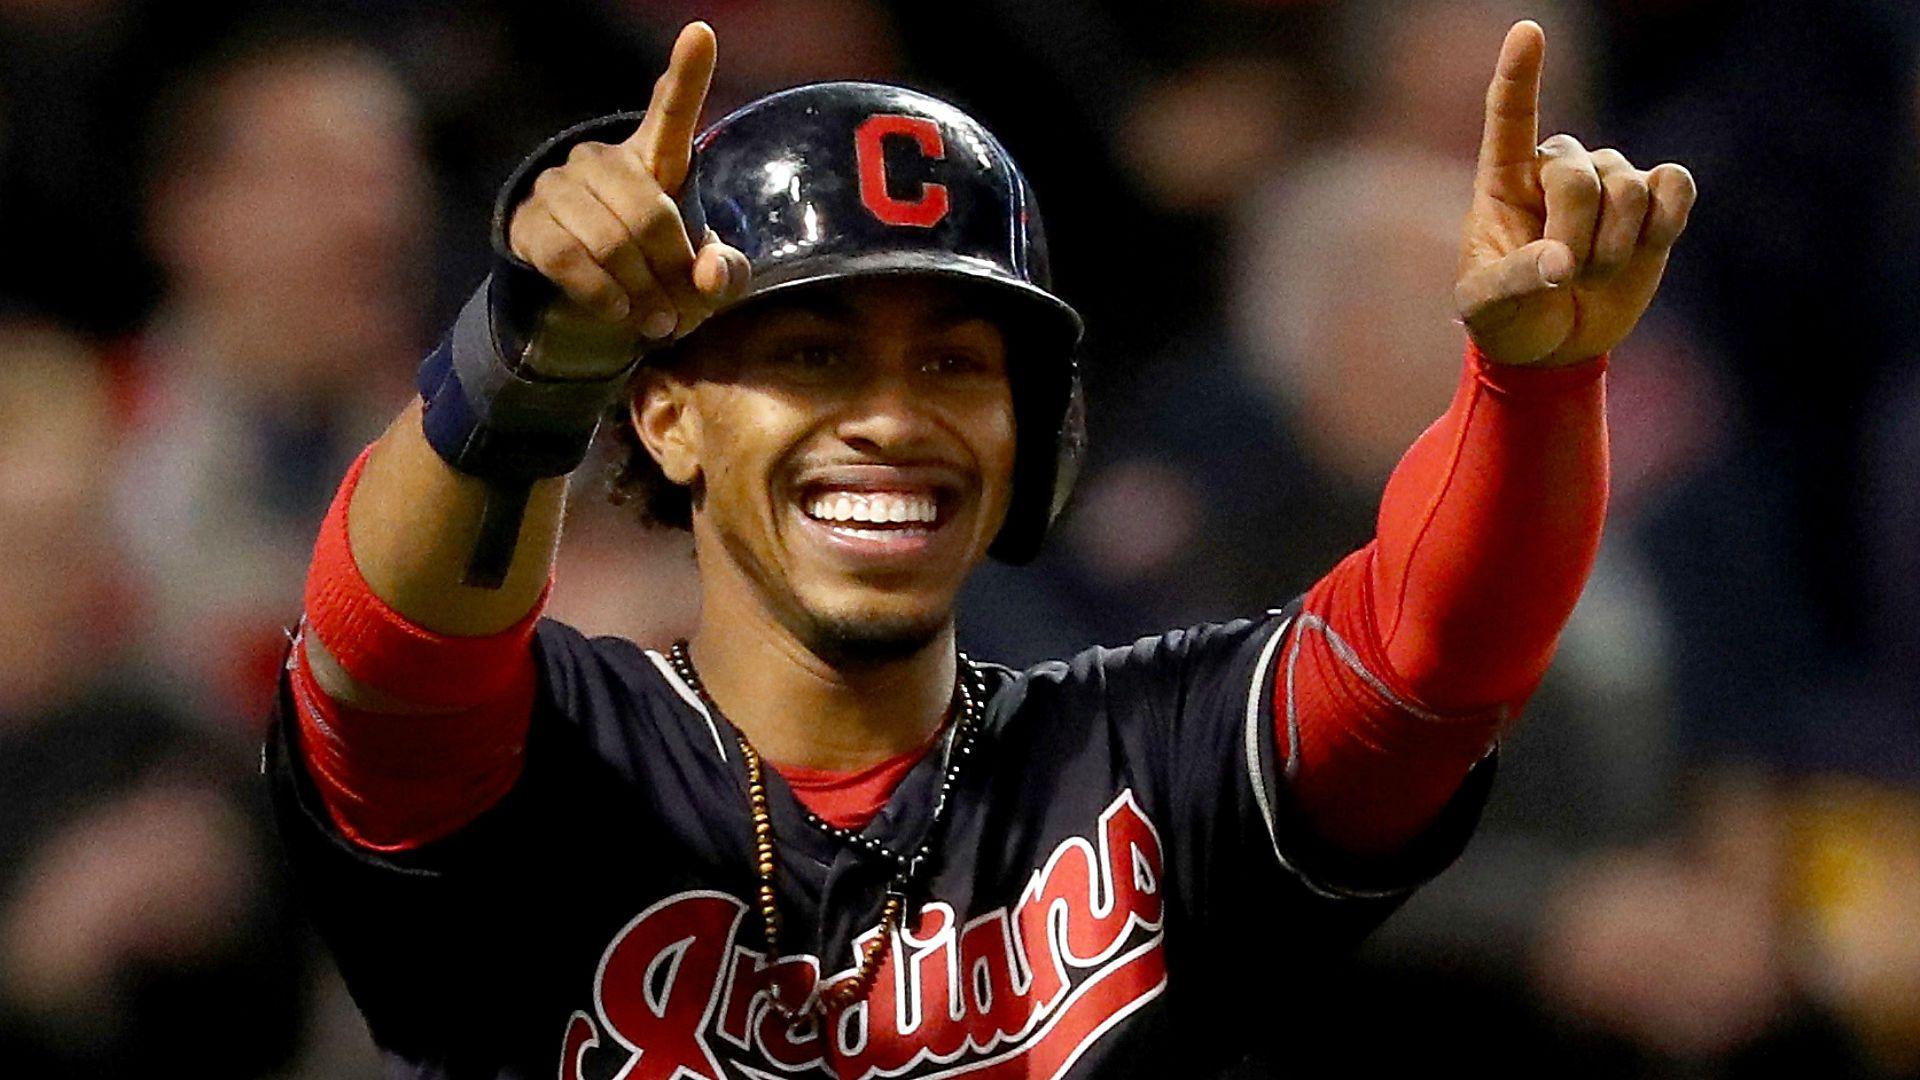 World Series 2016: Francisco Lindor's favorite players growing up a